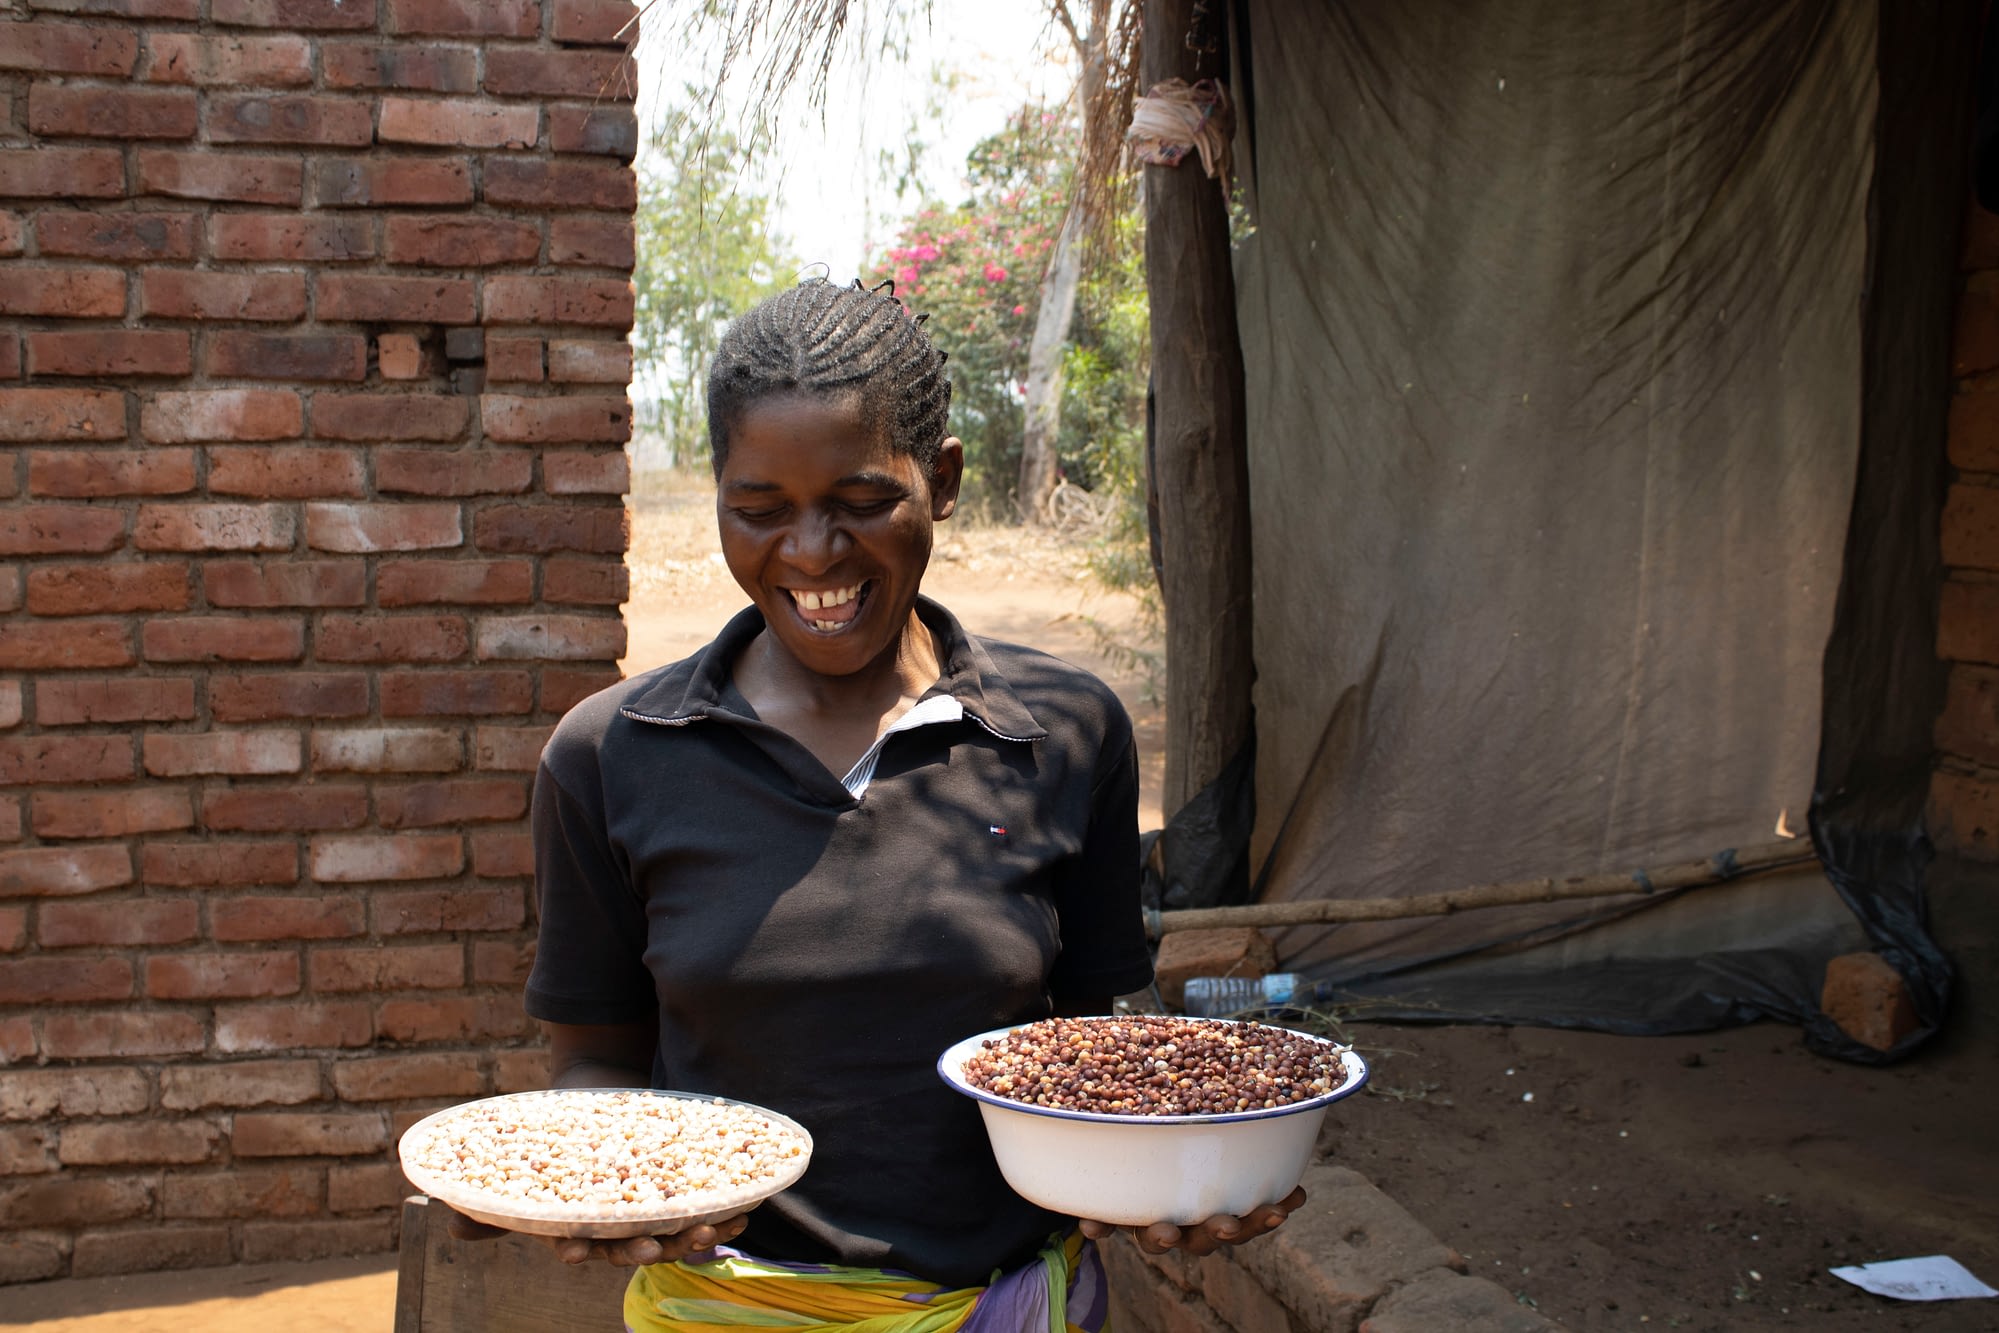 Pigeon peas are a delicacy in Lemu and Mary is happy to have sufficient stock at home. (Photo: Shiela Chikulo/CIMMYT)